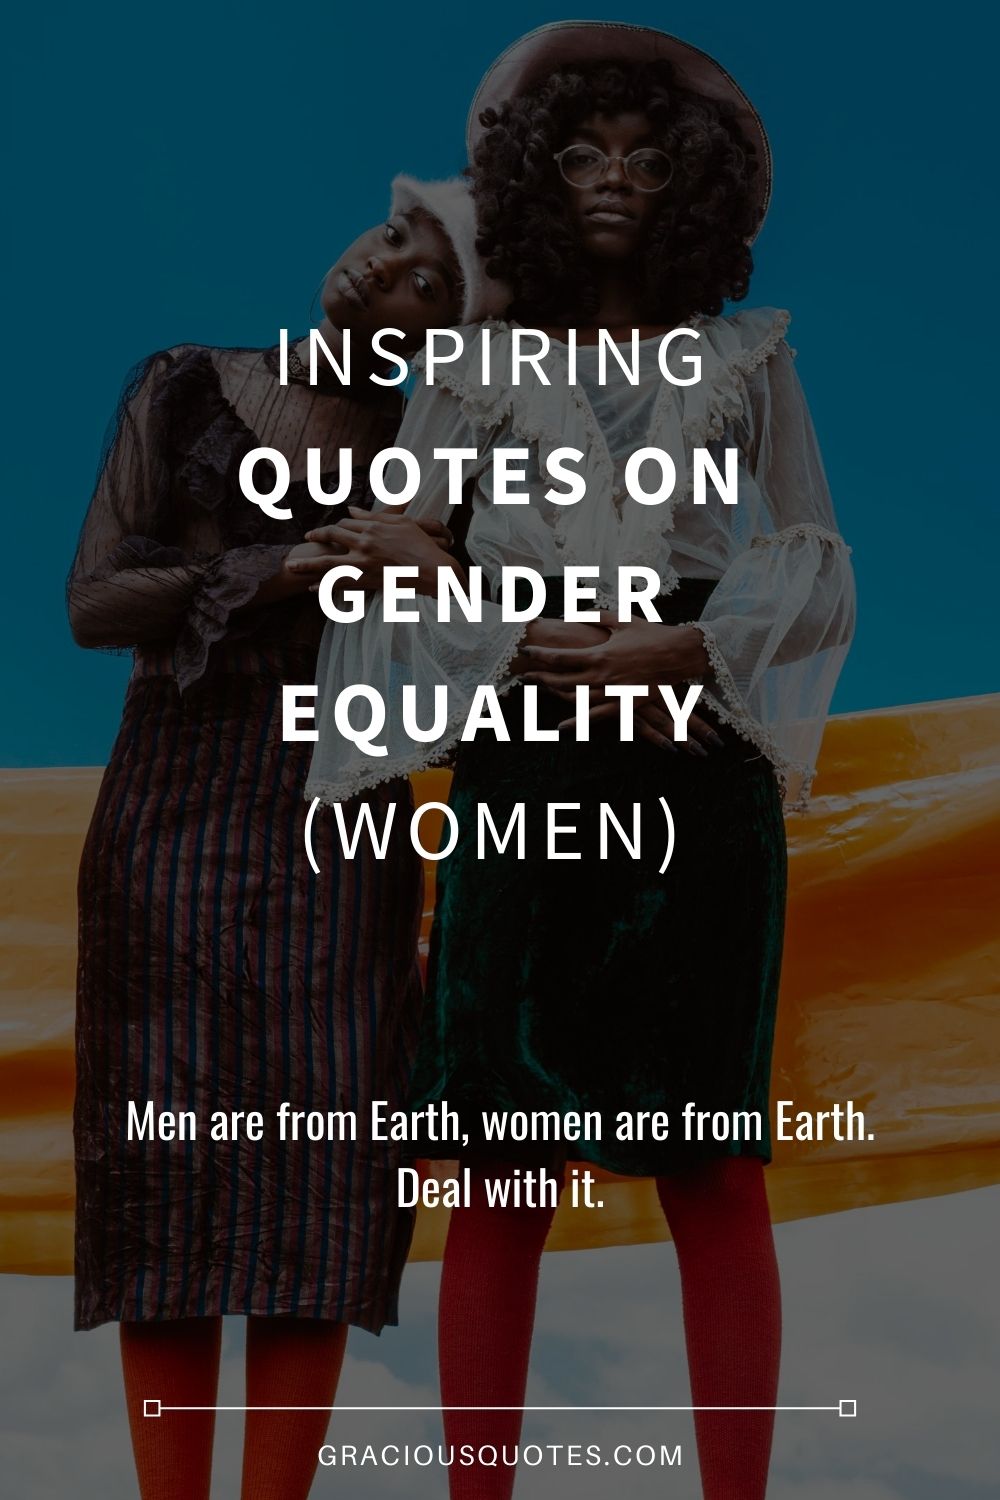 Inspiring Quotes on Gender Equality (WOMEN) - Gracious Quotes